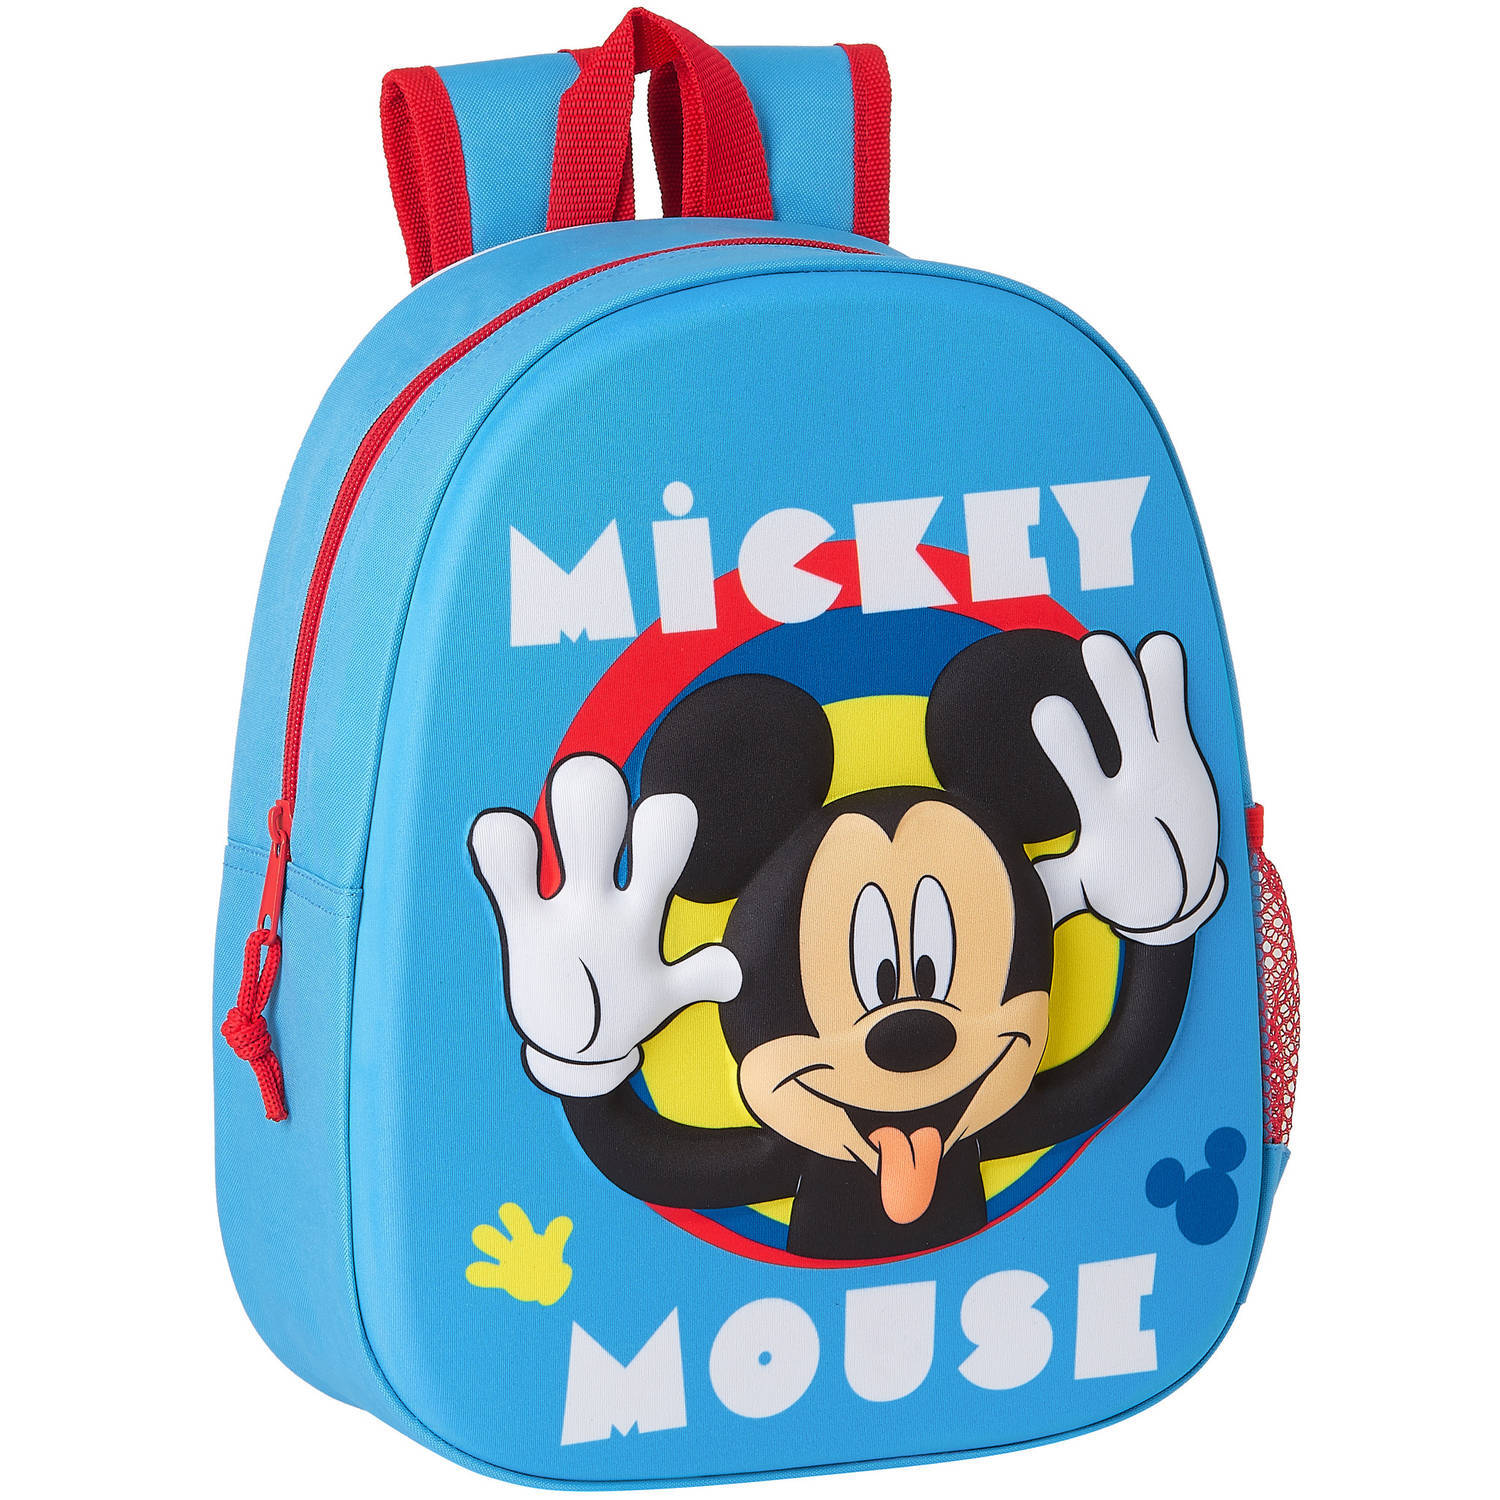 Simbashop Mouse Rugzak 3D Funny - 33 x 27 x 10 cm - Polyester